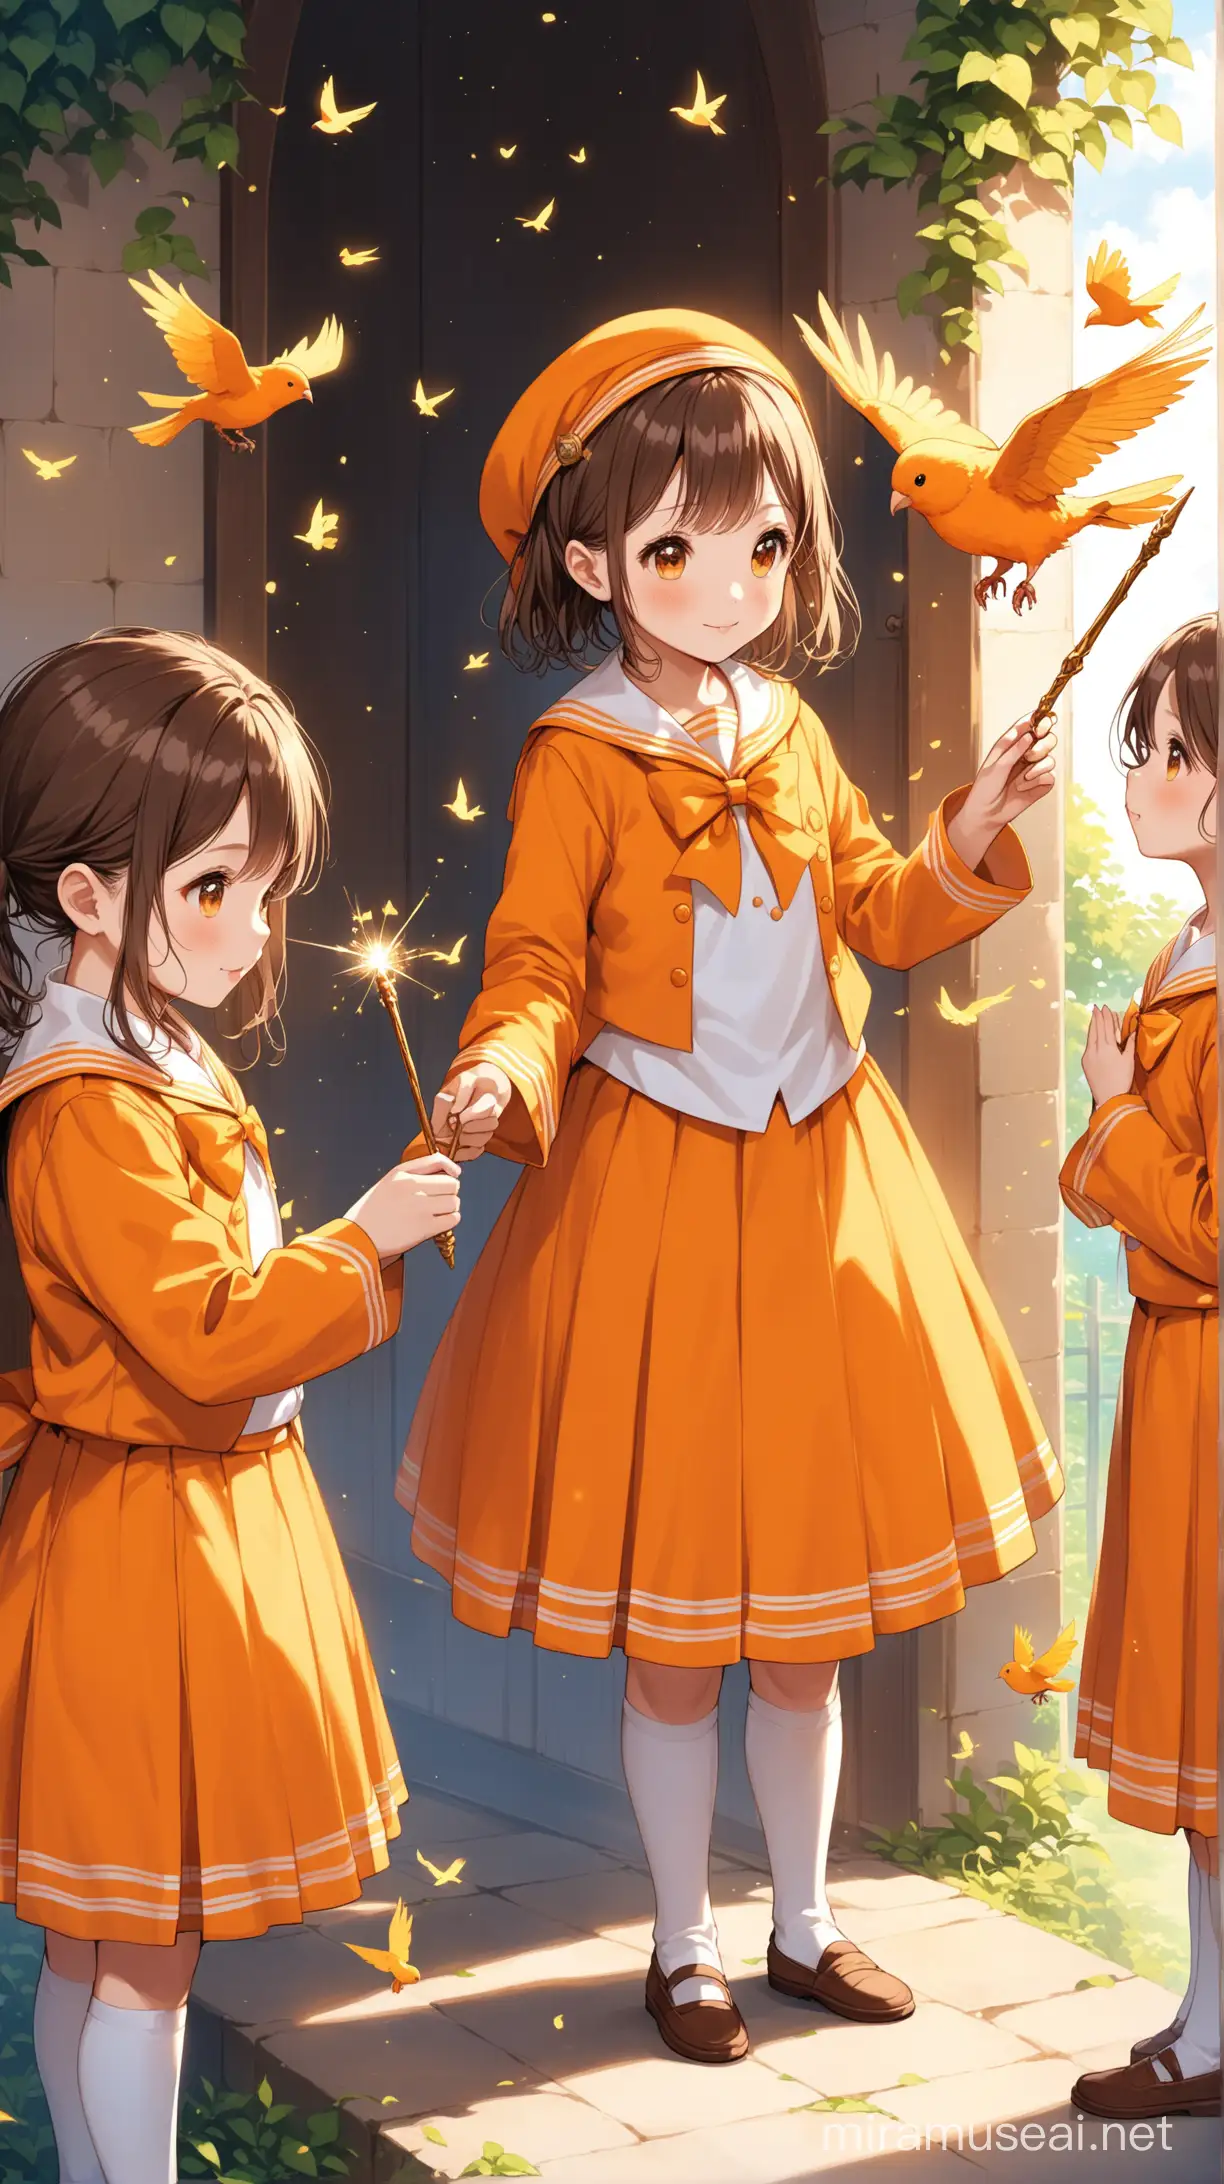 Magical Education Children in White and Orange Uniforms with Wands and Pet Birds